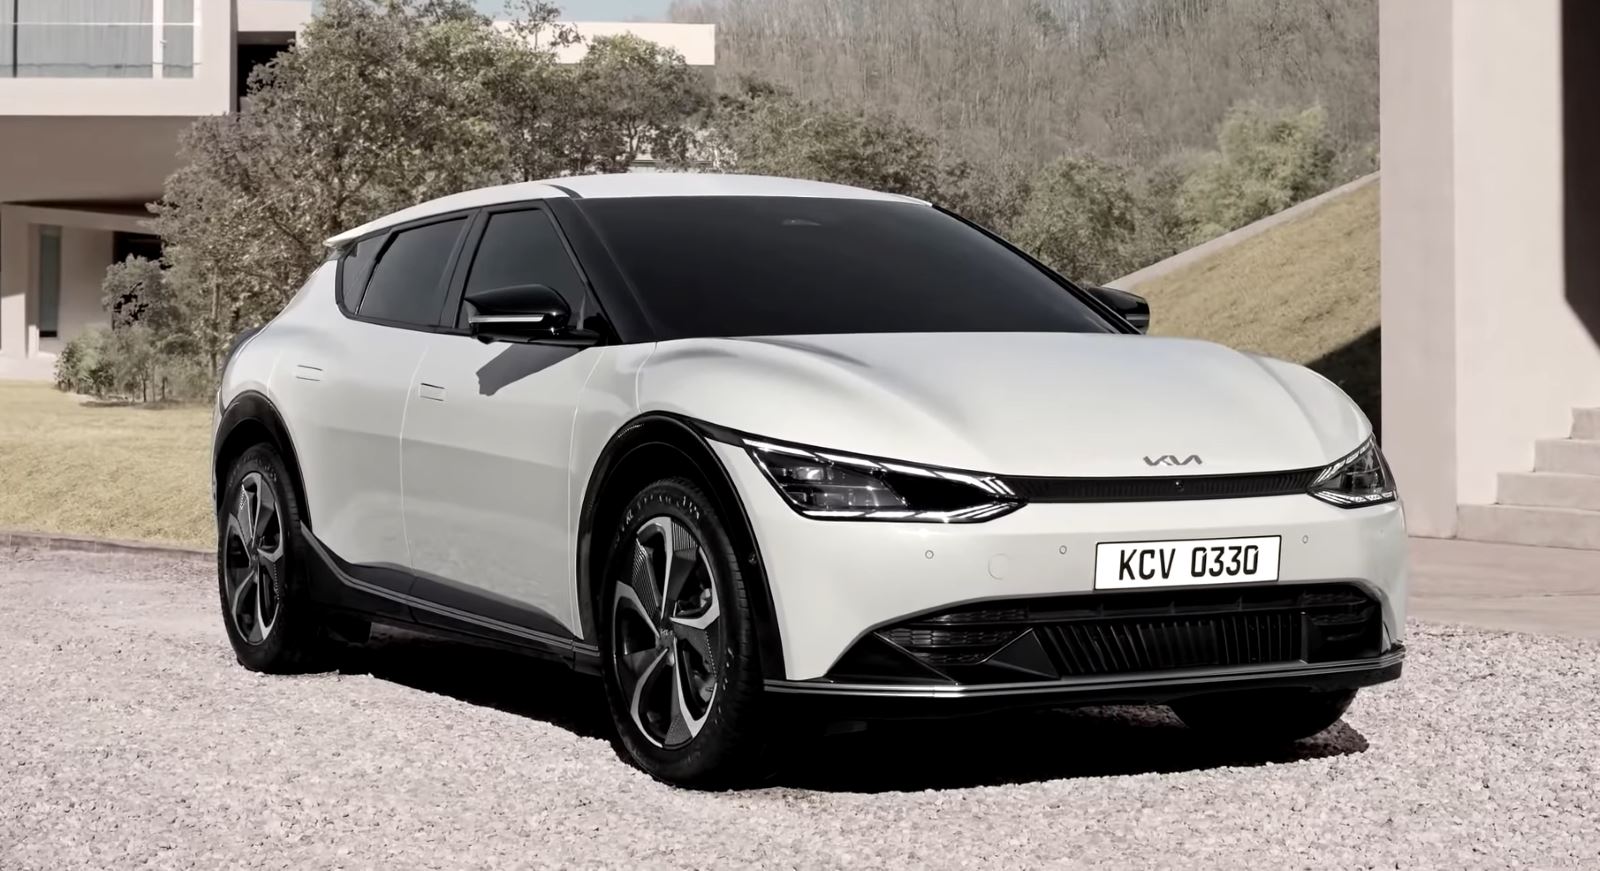 EV6 Electric World Premiere On March 30: Futuristic Design, Spacious Interior And A - Vehiclesuggest